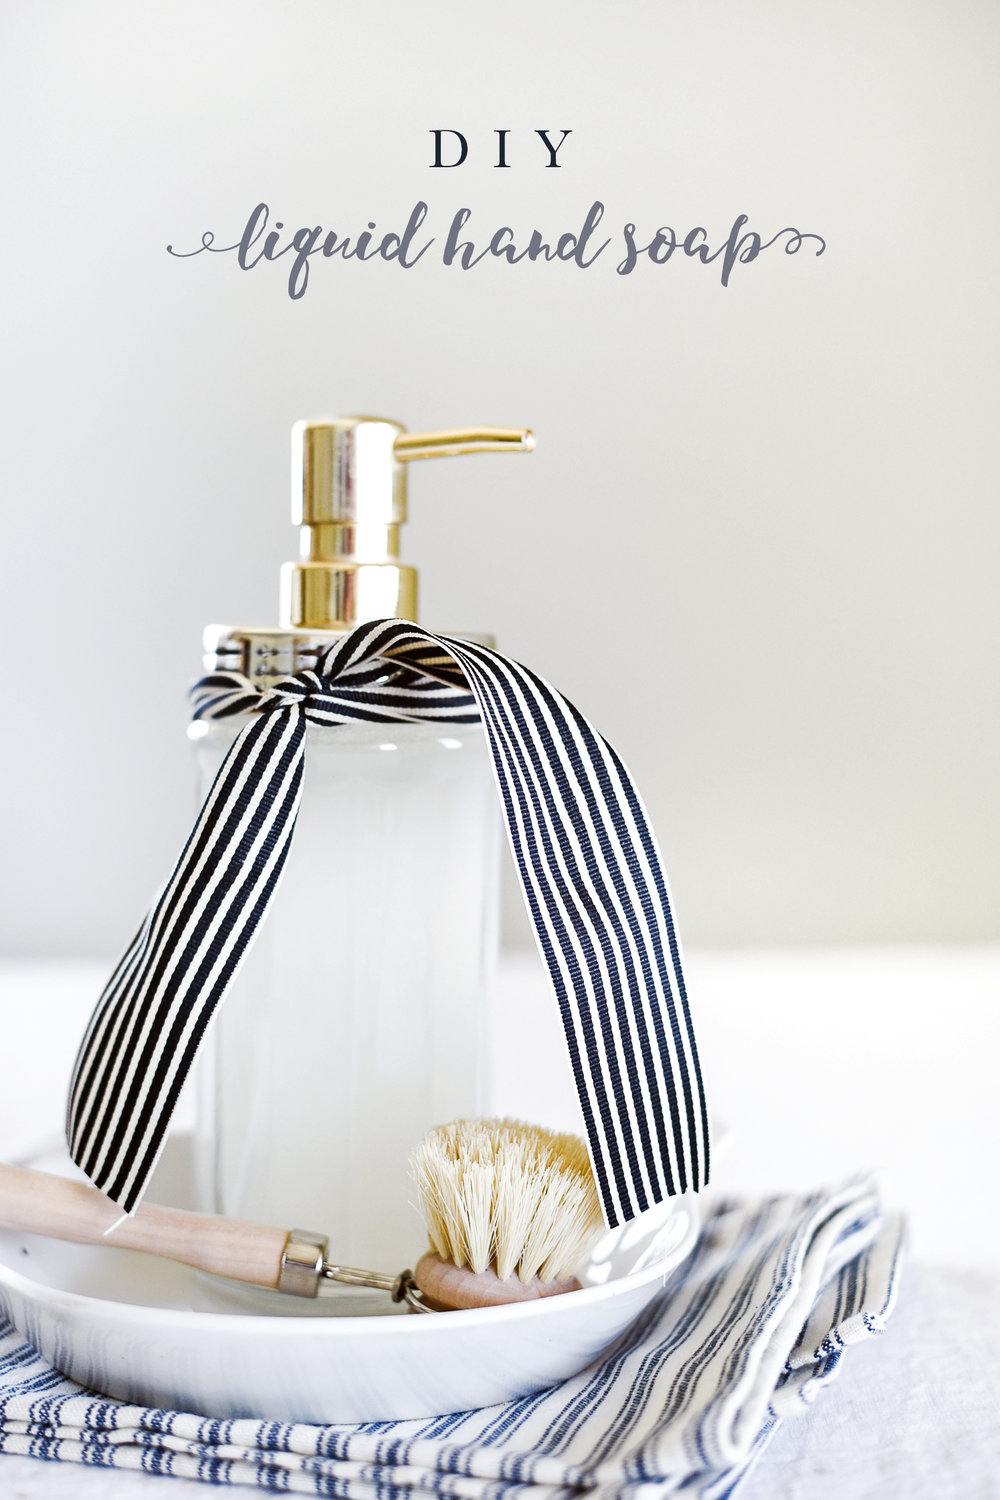 Make this DIY liquid hand soap with a few simple ingredients! boxwoodavenue.com